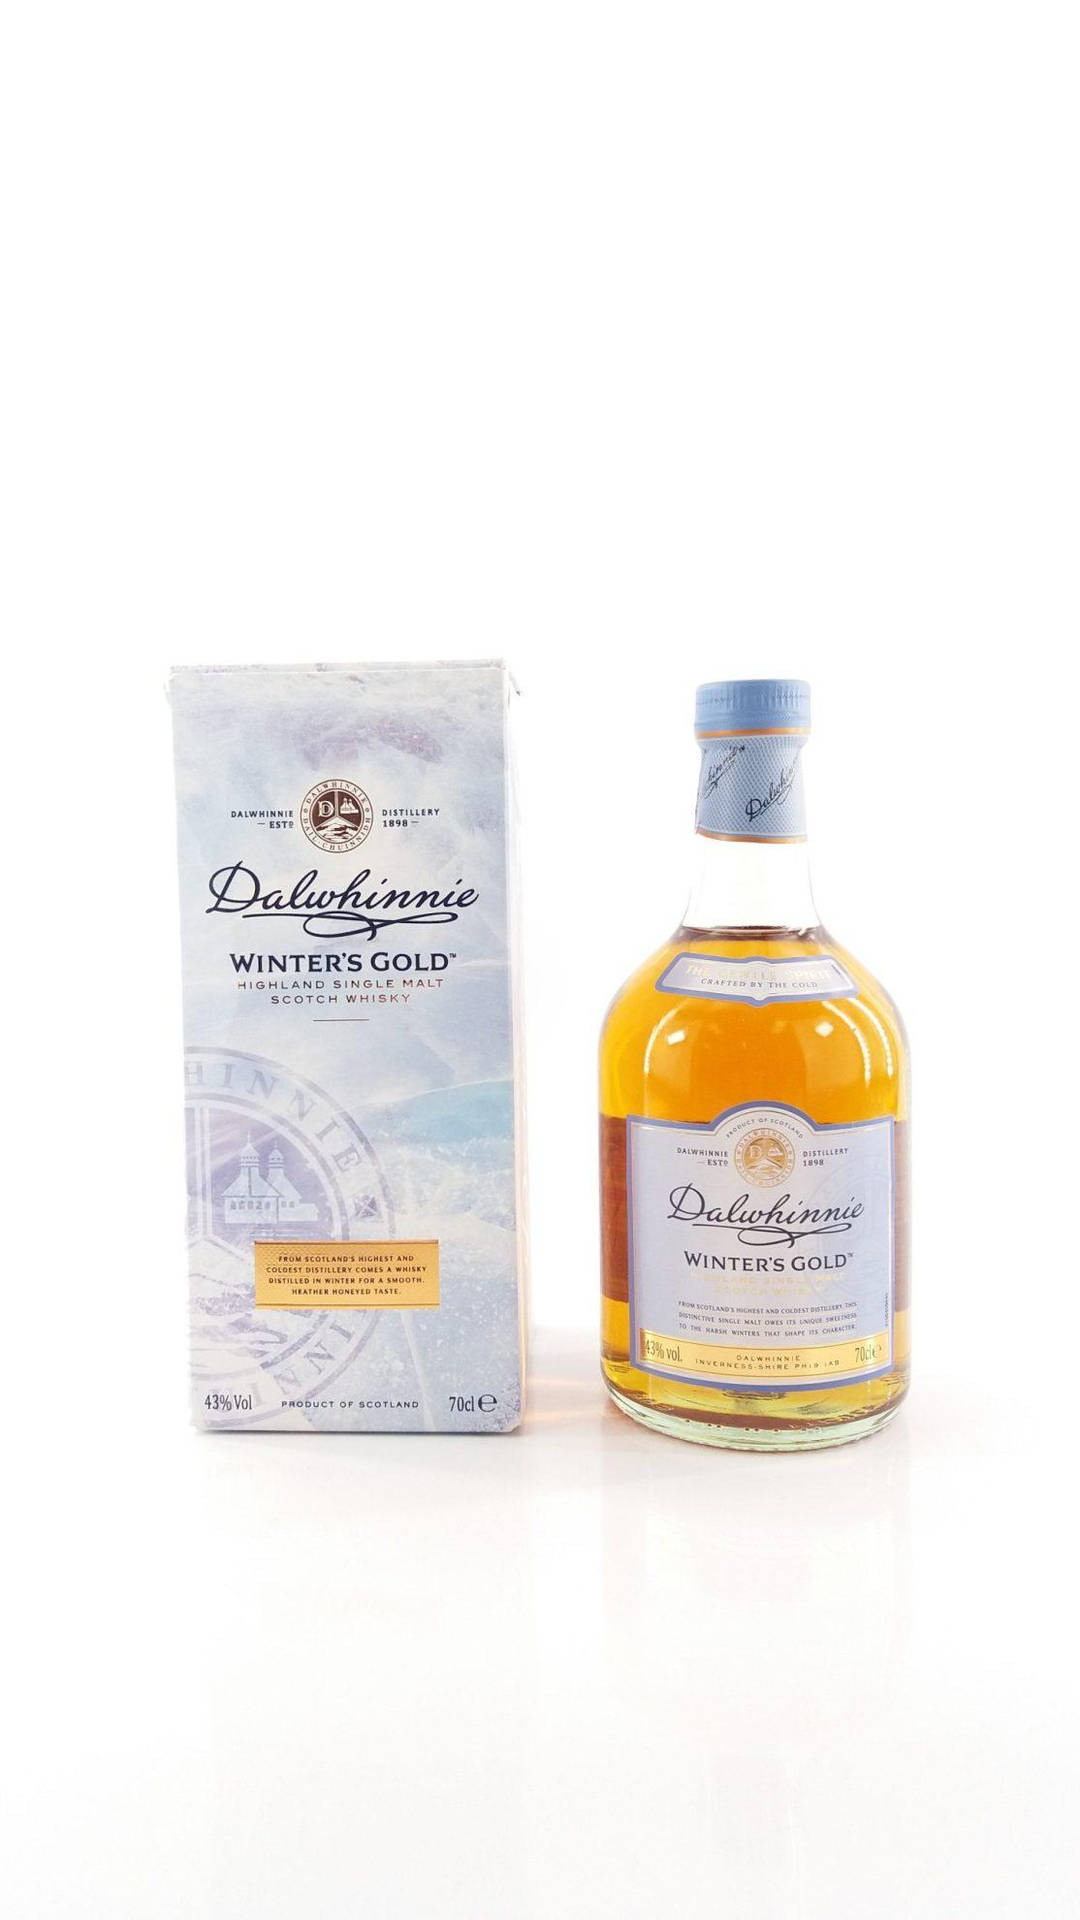 Dalwhinnie Whisky Winter's Gold Wallpaper